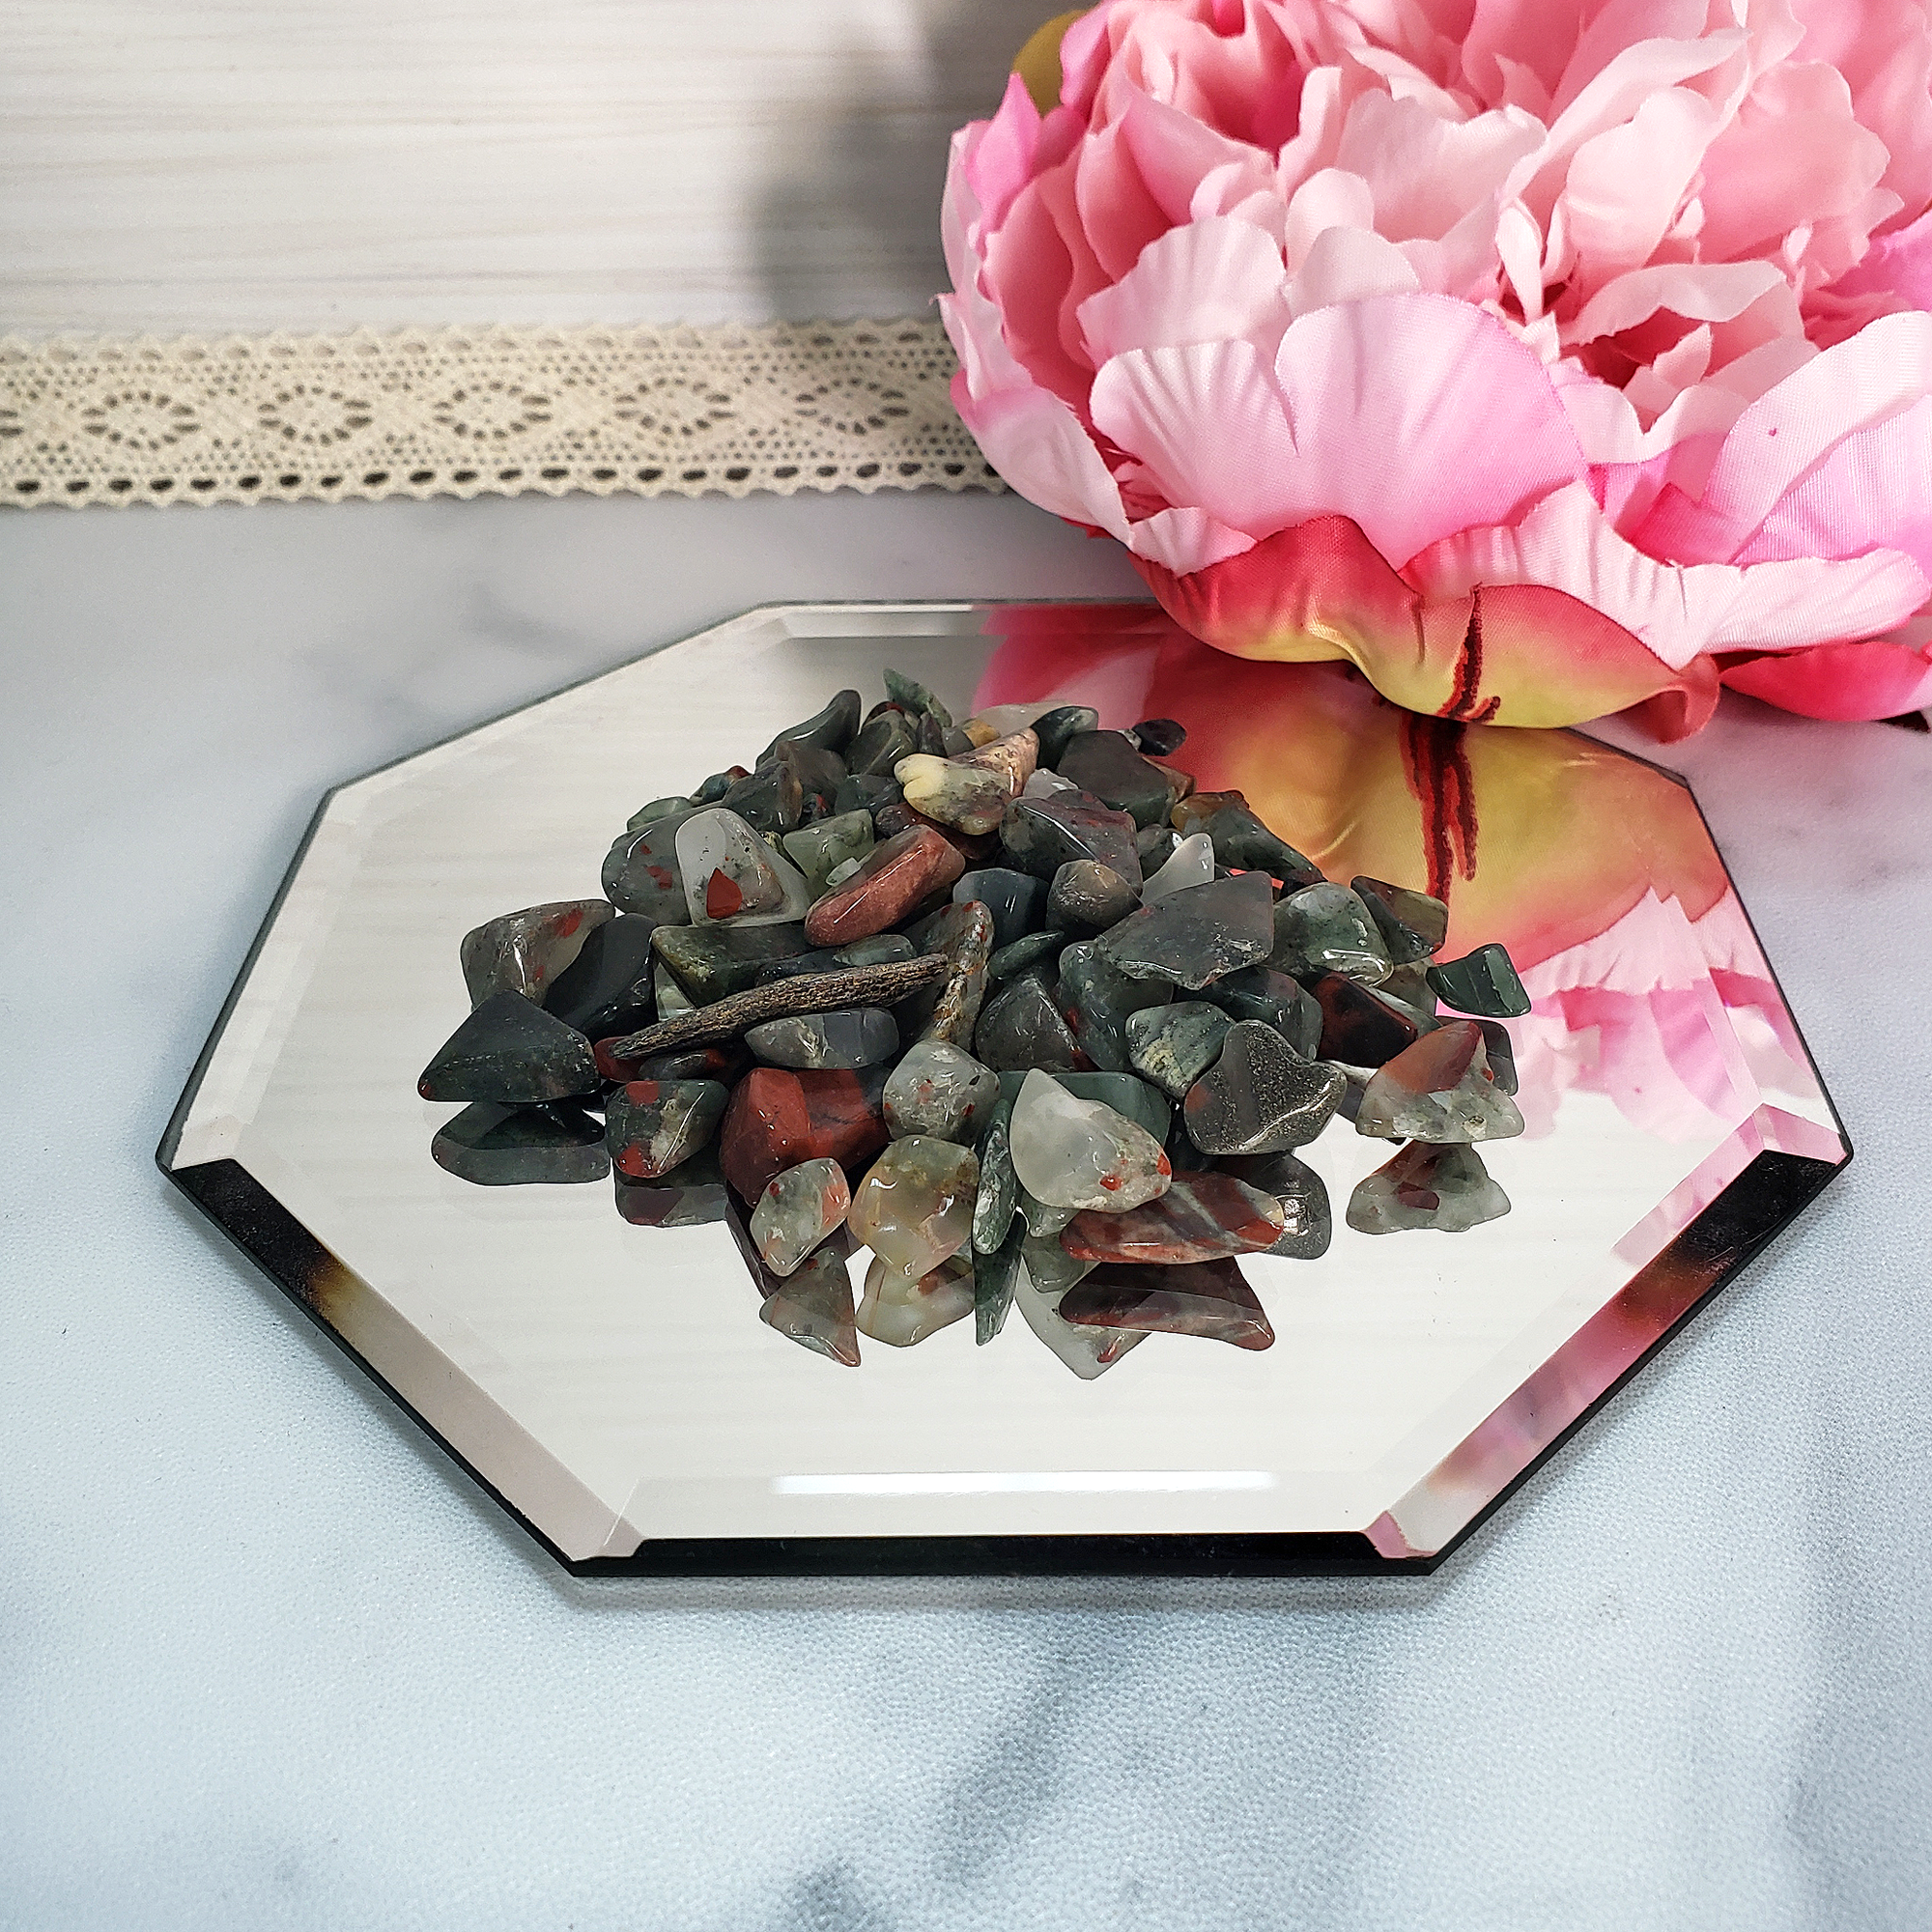 Seftonite Bloodstone Natural Gemstone Chips By the Ounce - Bloodstone Crystal Chips on Craft Mirror